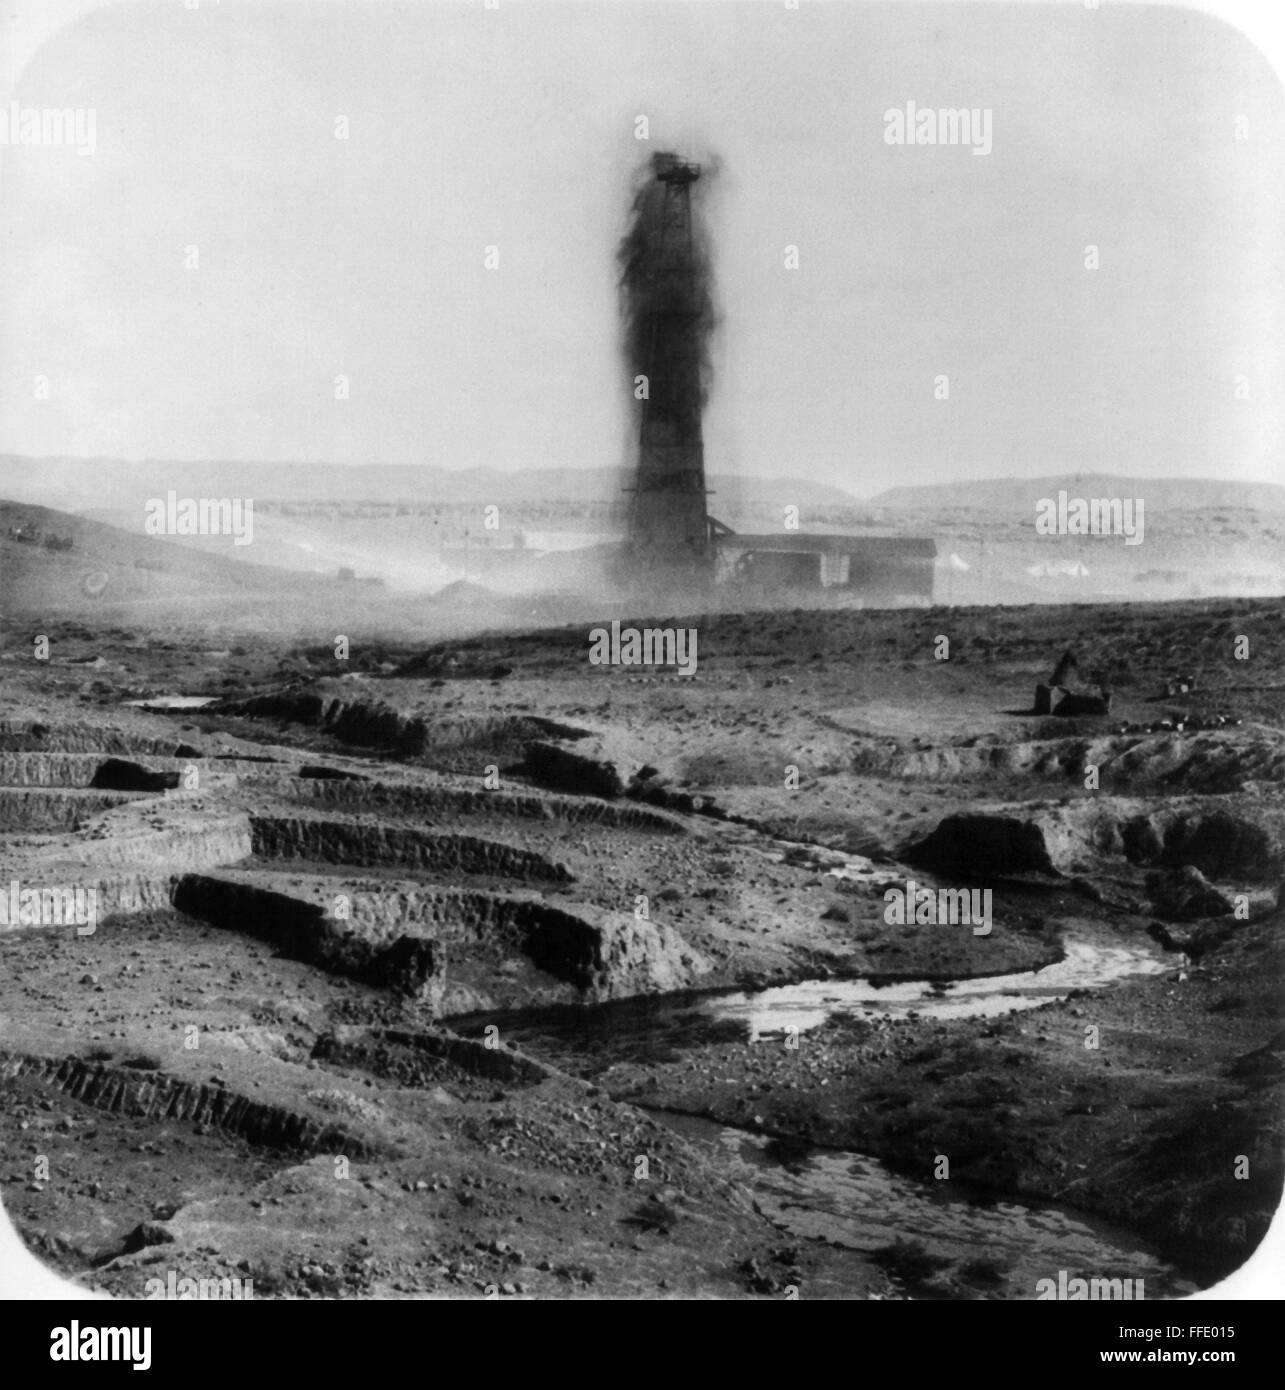 IRAQ: OIL WELL, 1930s. /nGushing oil well and a stream of oil in the foreground, Kirkuk, Iraq, 1932-33. Stock Photo